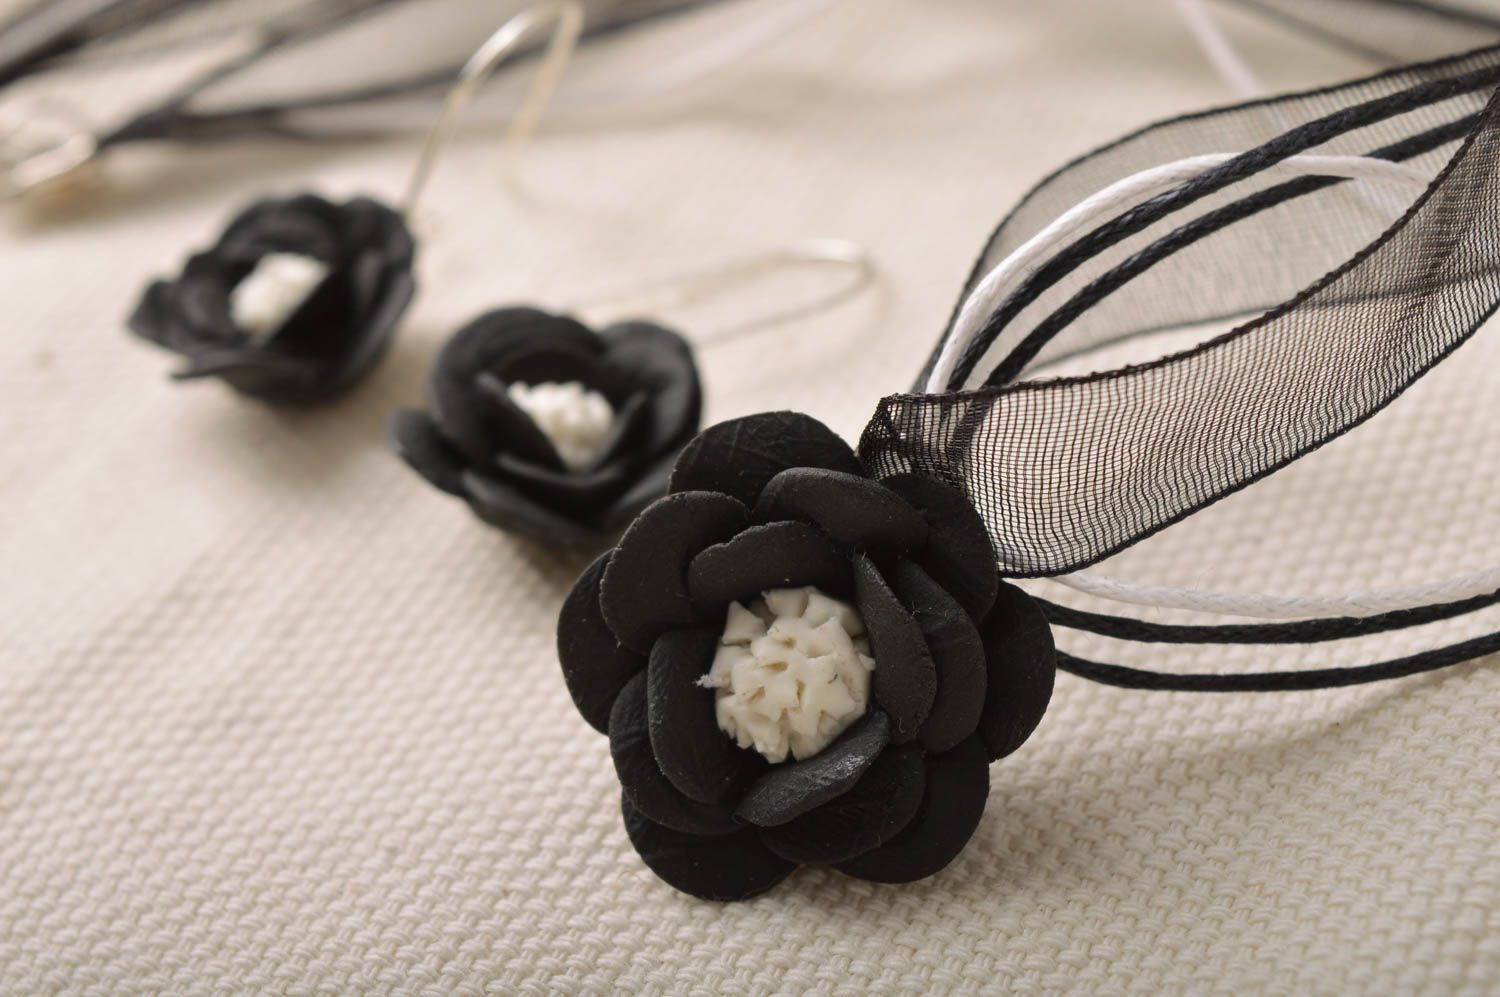 Handmade cold porcelain jewelry set earrings and necklace with black flowers photo 1